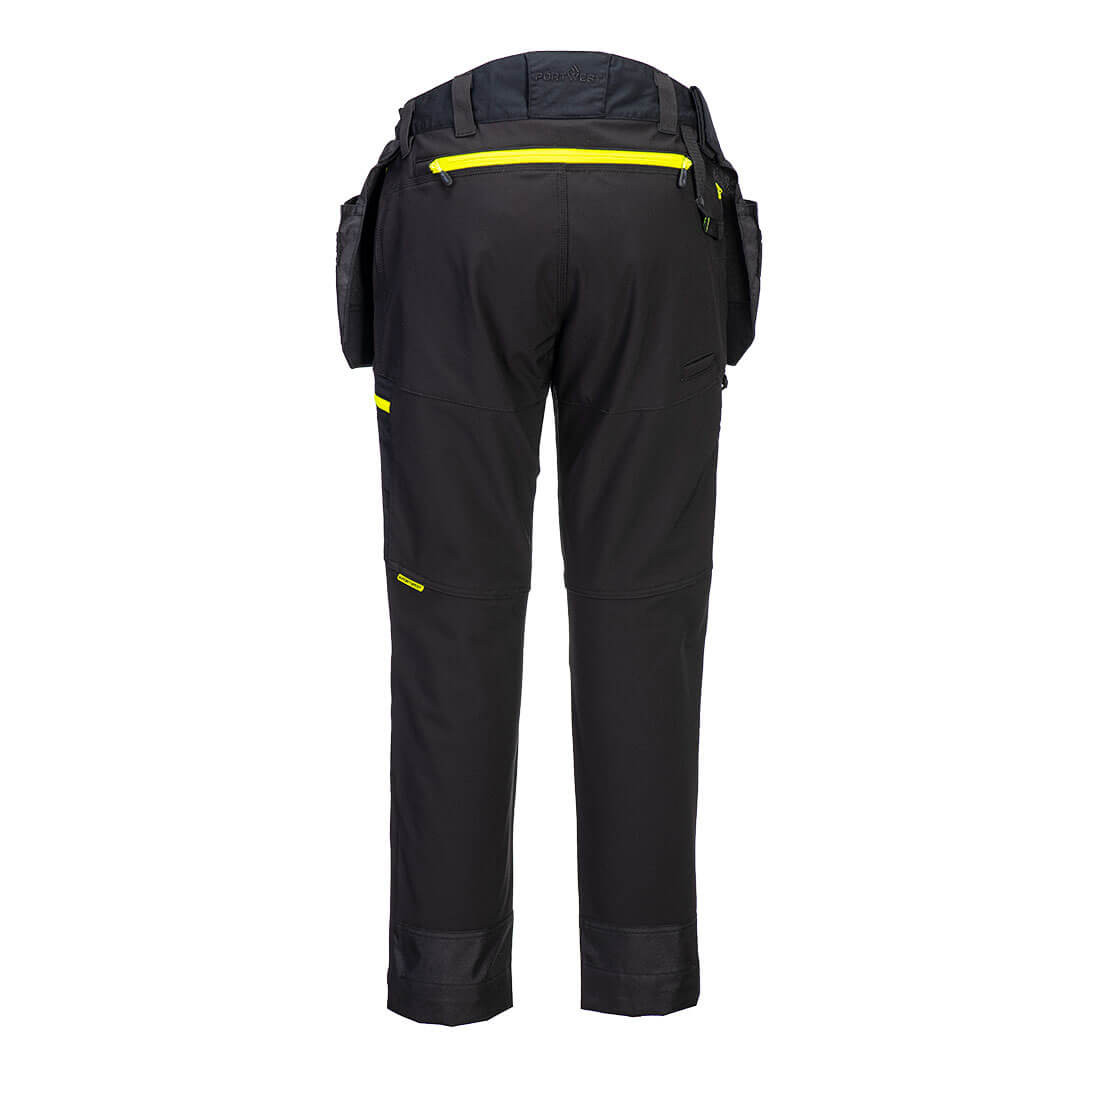 DX4 Detachable Holster Pocket Softshell Trousers - Safetywear